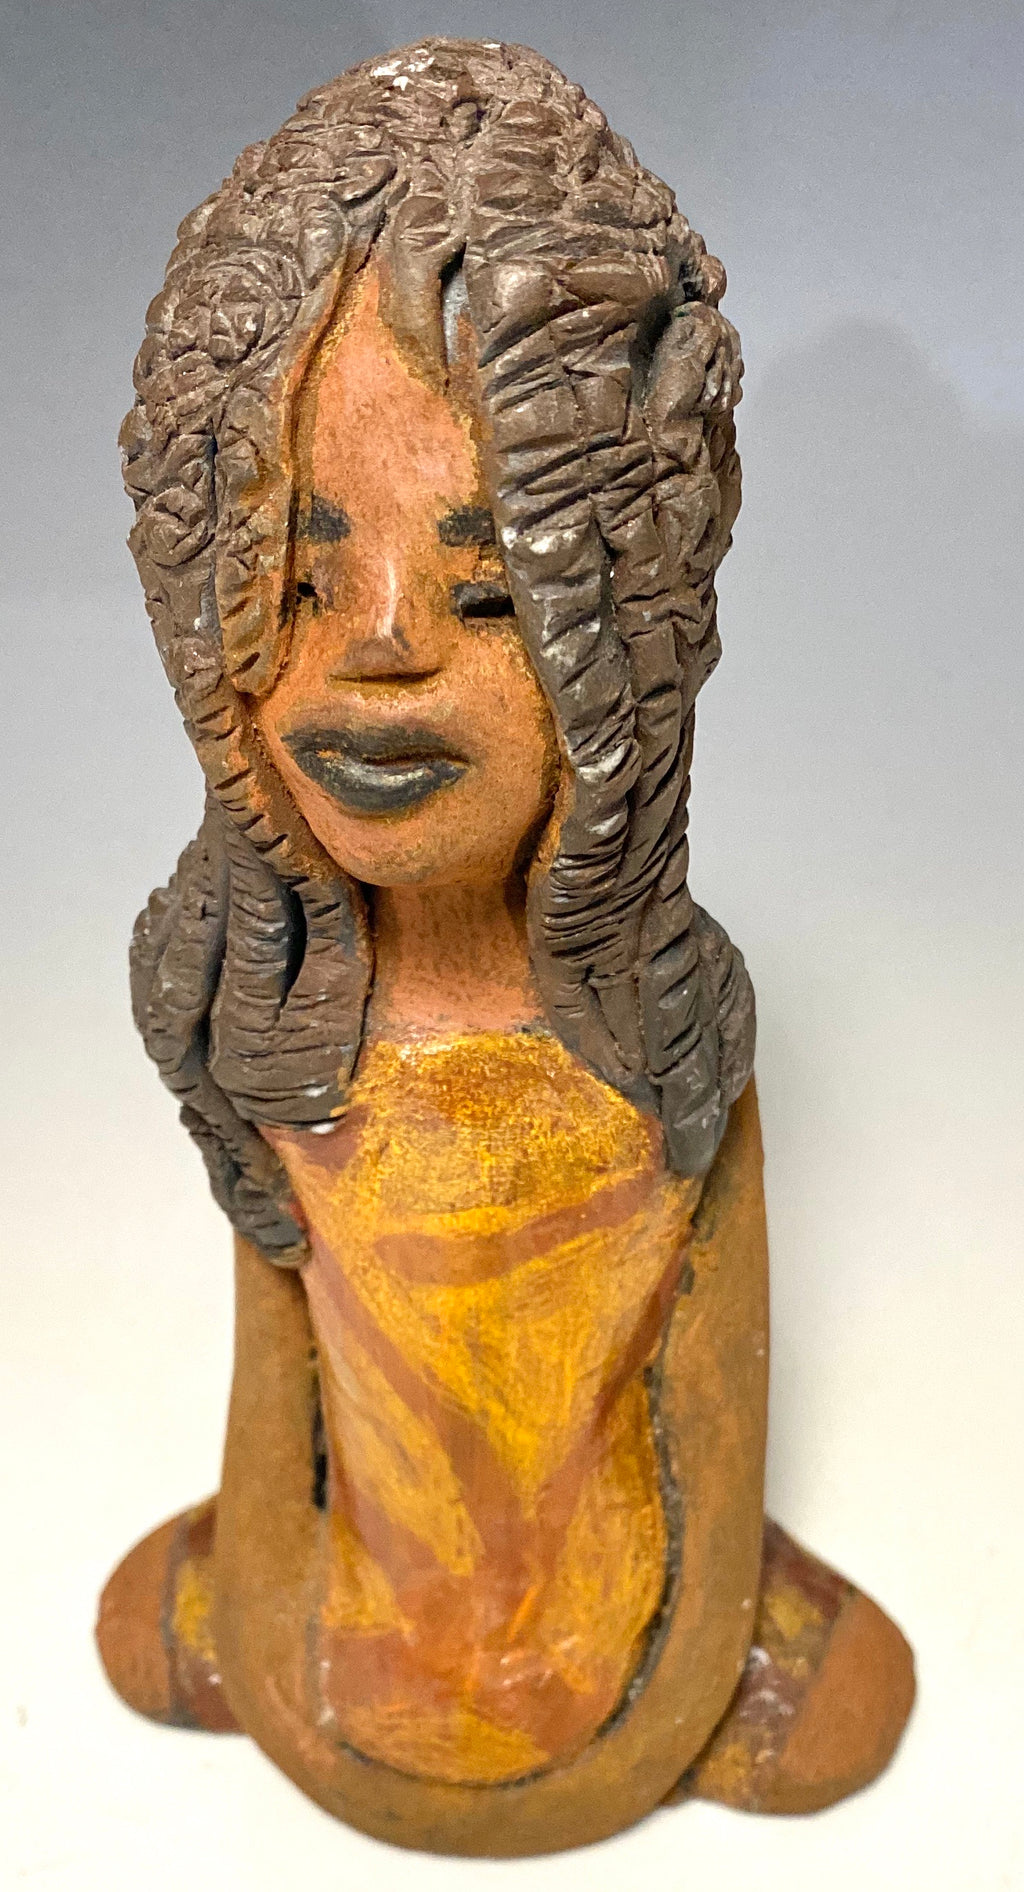 Meet Bree! Bree stands 7.5' x 4.5" x 2.5" and weighs 11 ozs. She has a lovely honey brown complexion. Bree wears a golden brown striped dress. Her hair is smokey black .and made of clay. Bree's long loving arms rest at her side.